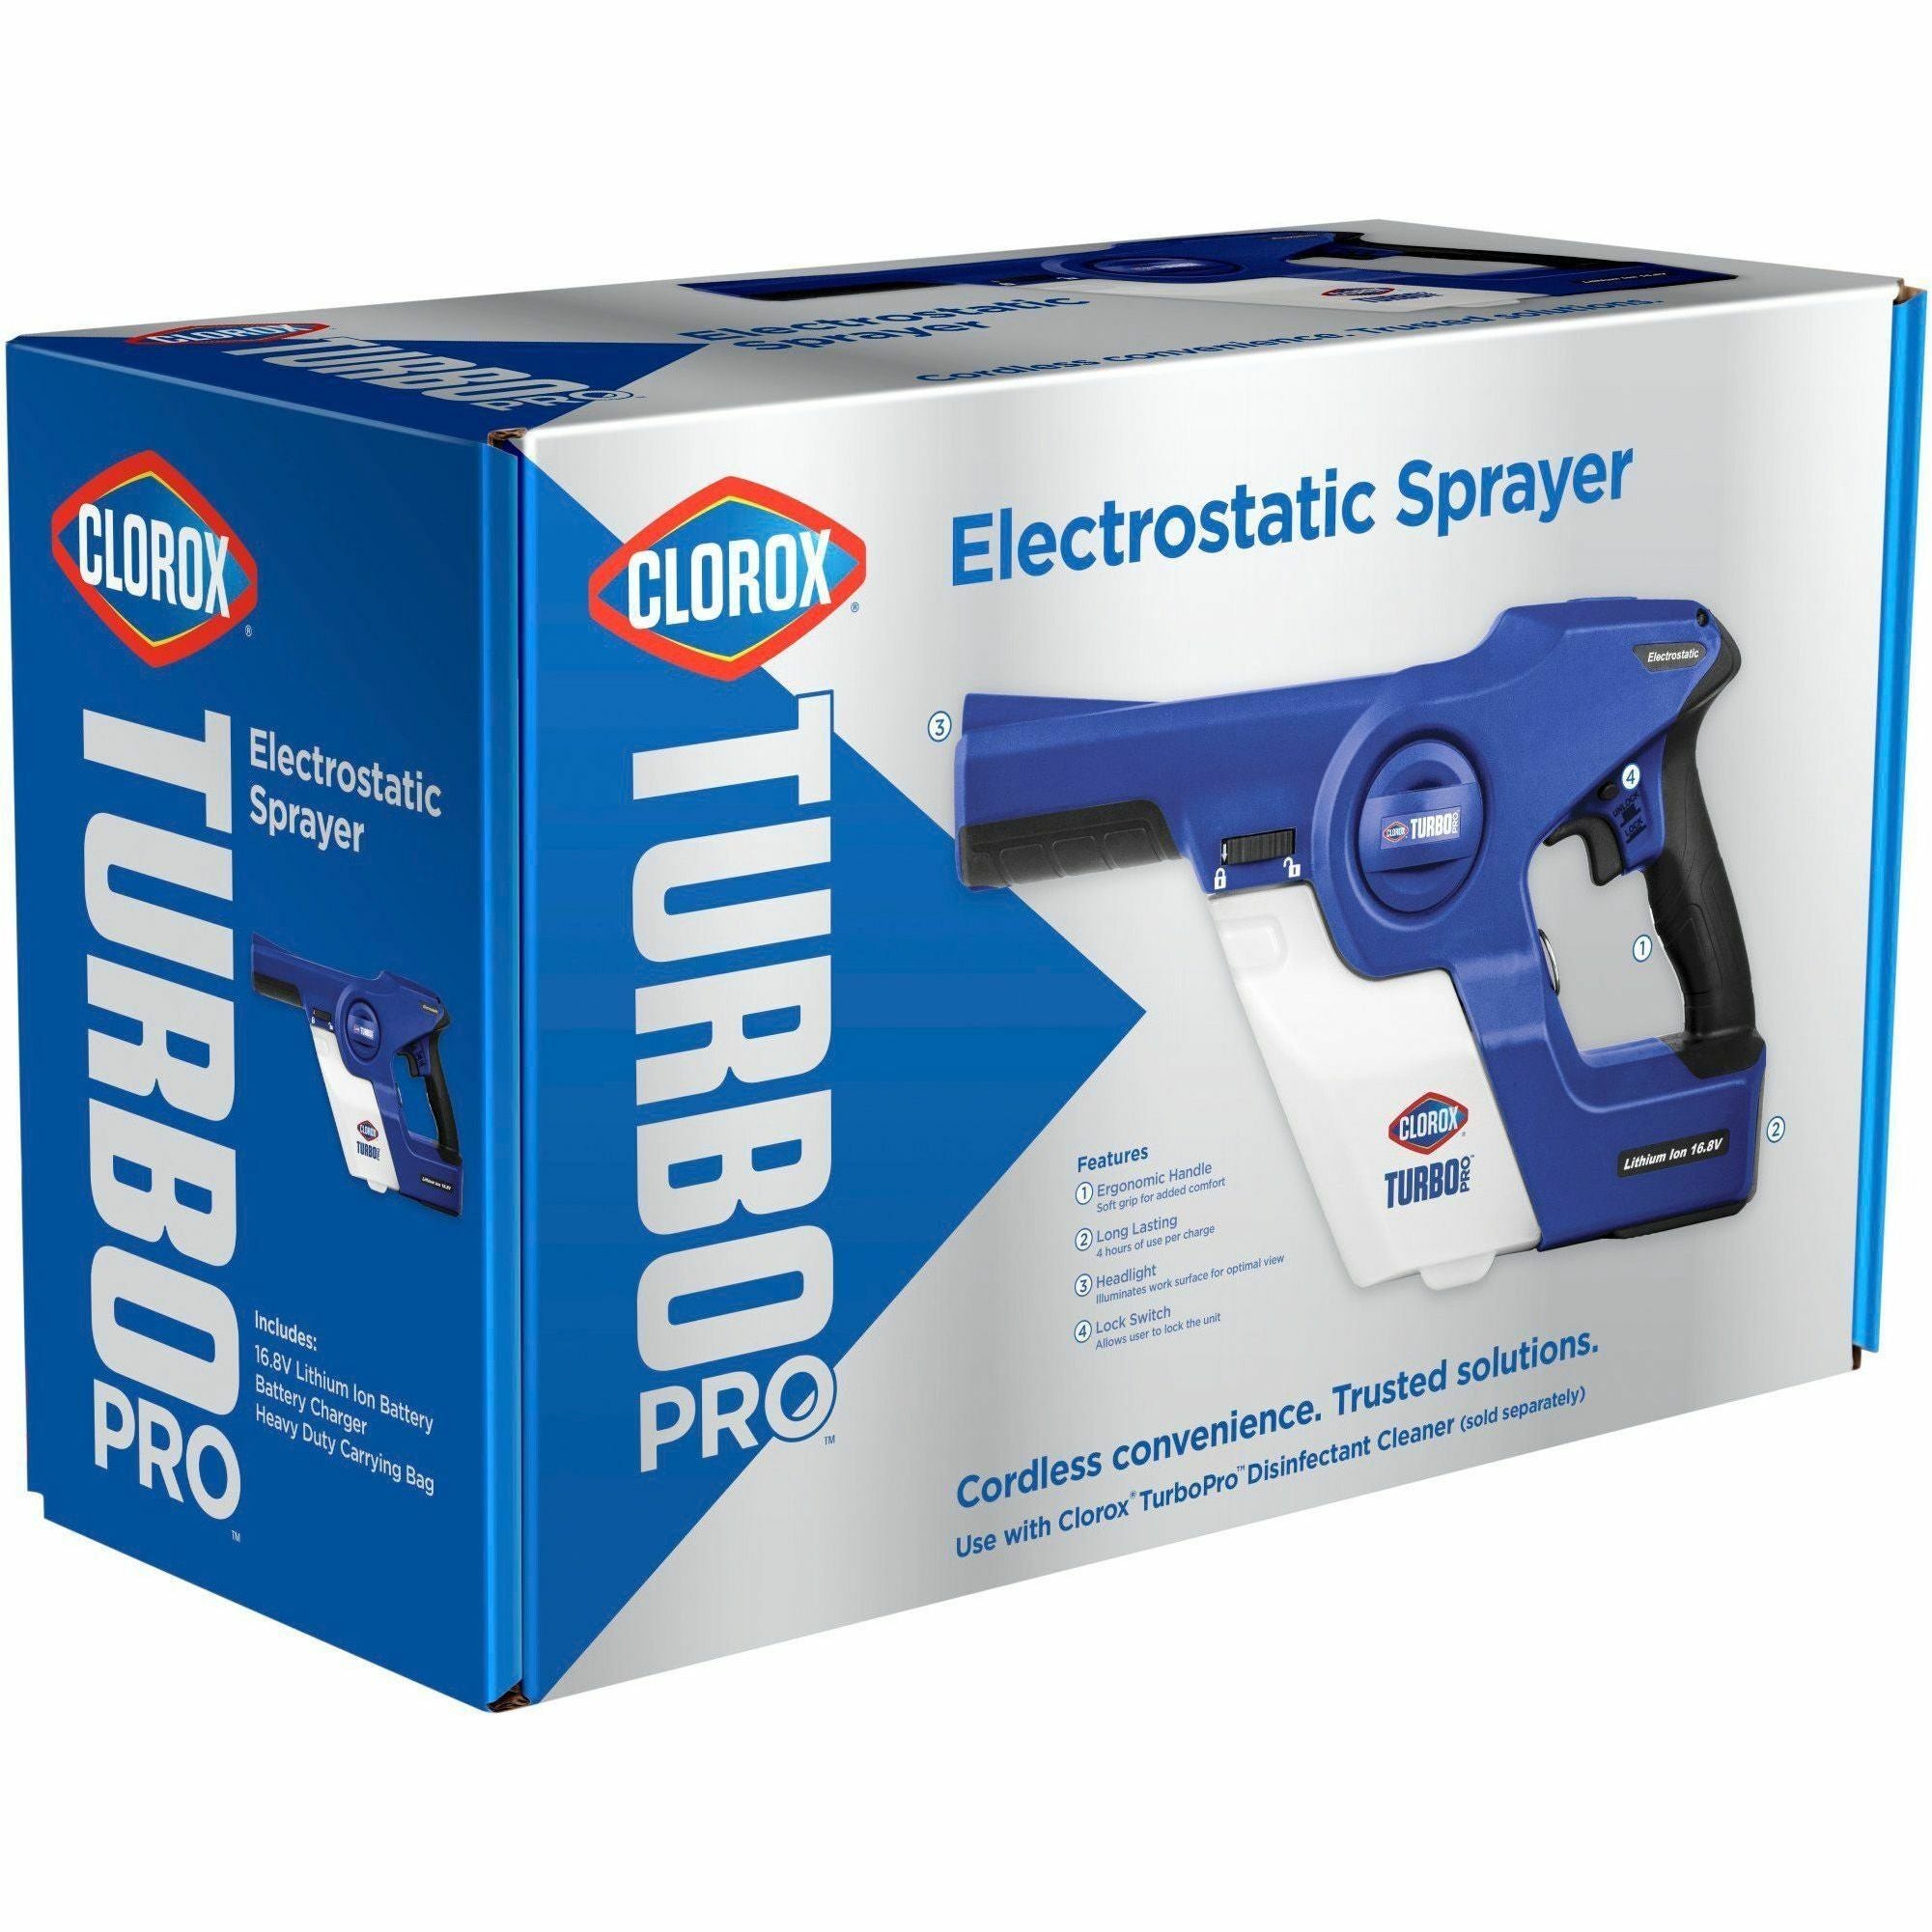 clorox-turbopro-electrostatic-sprayer-suitable-for-disinfecting-airport-hotel-laundry-room-daycare-office-gym-locker-room-electrostatic-handheld-disinfectant-lightweight-1-each-blue_clo29561 - 3